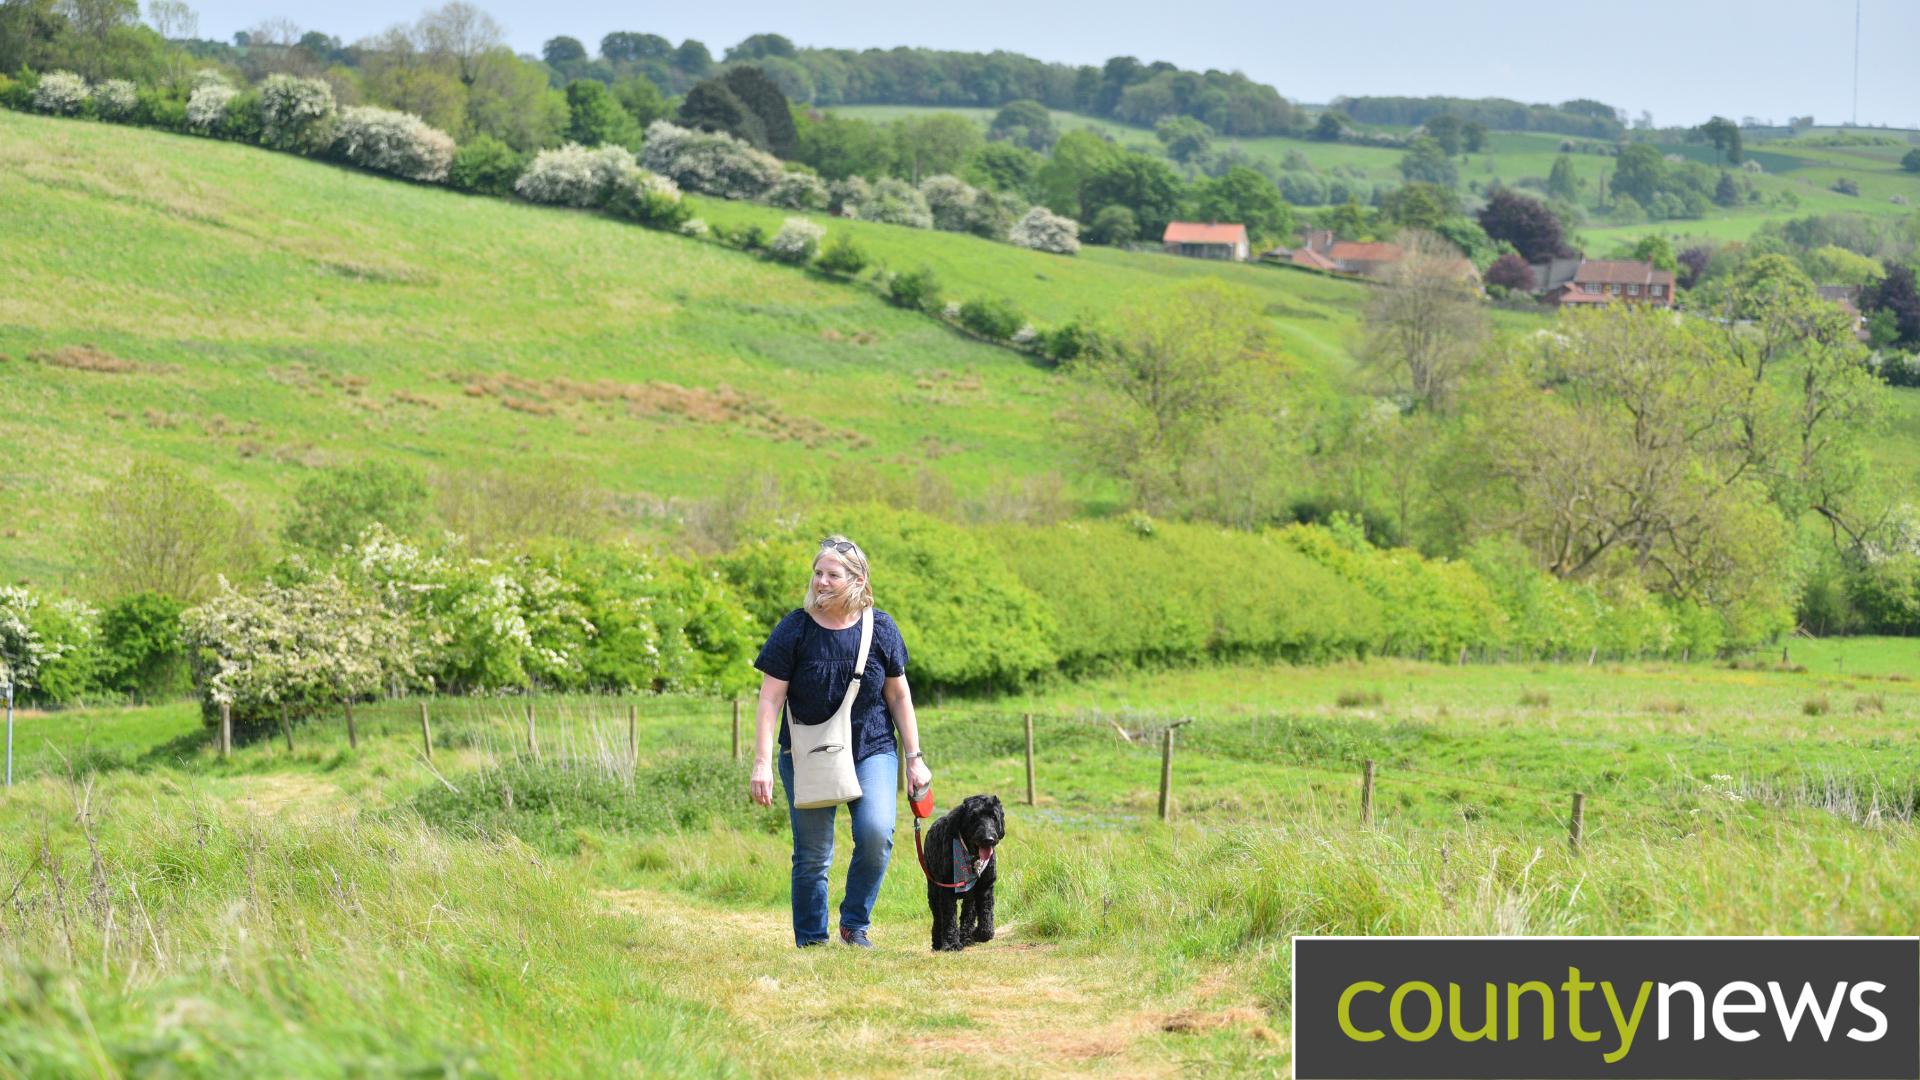 A person walks their dog through a section of the Wolds